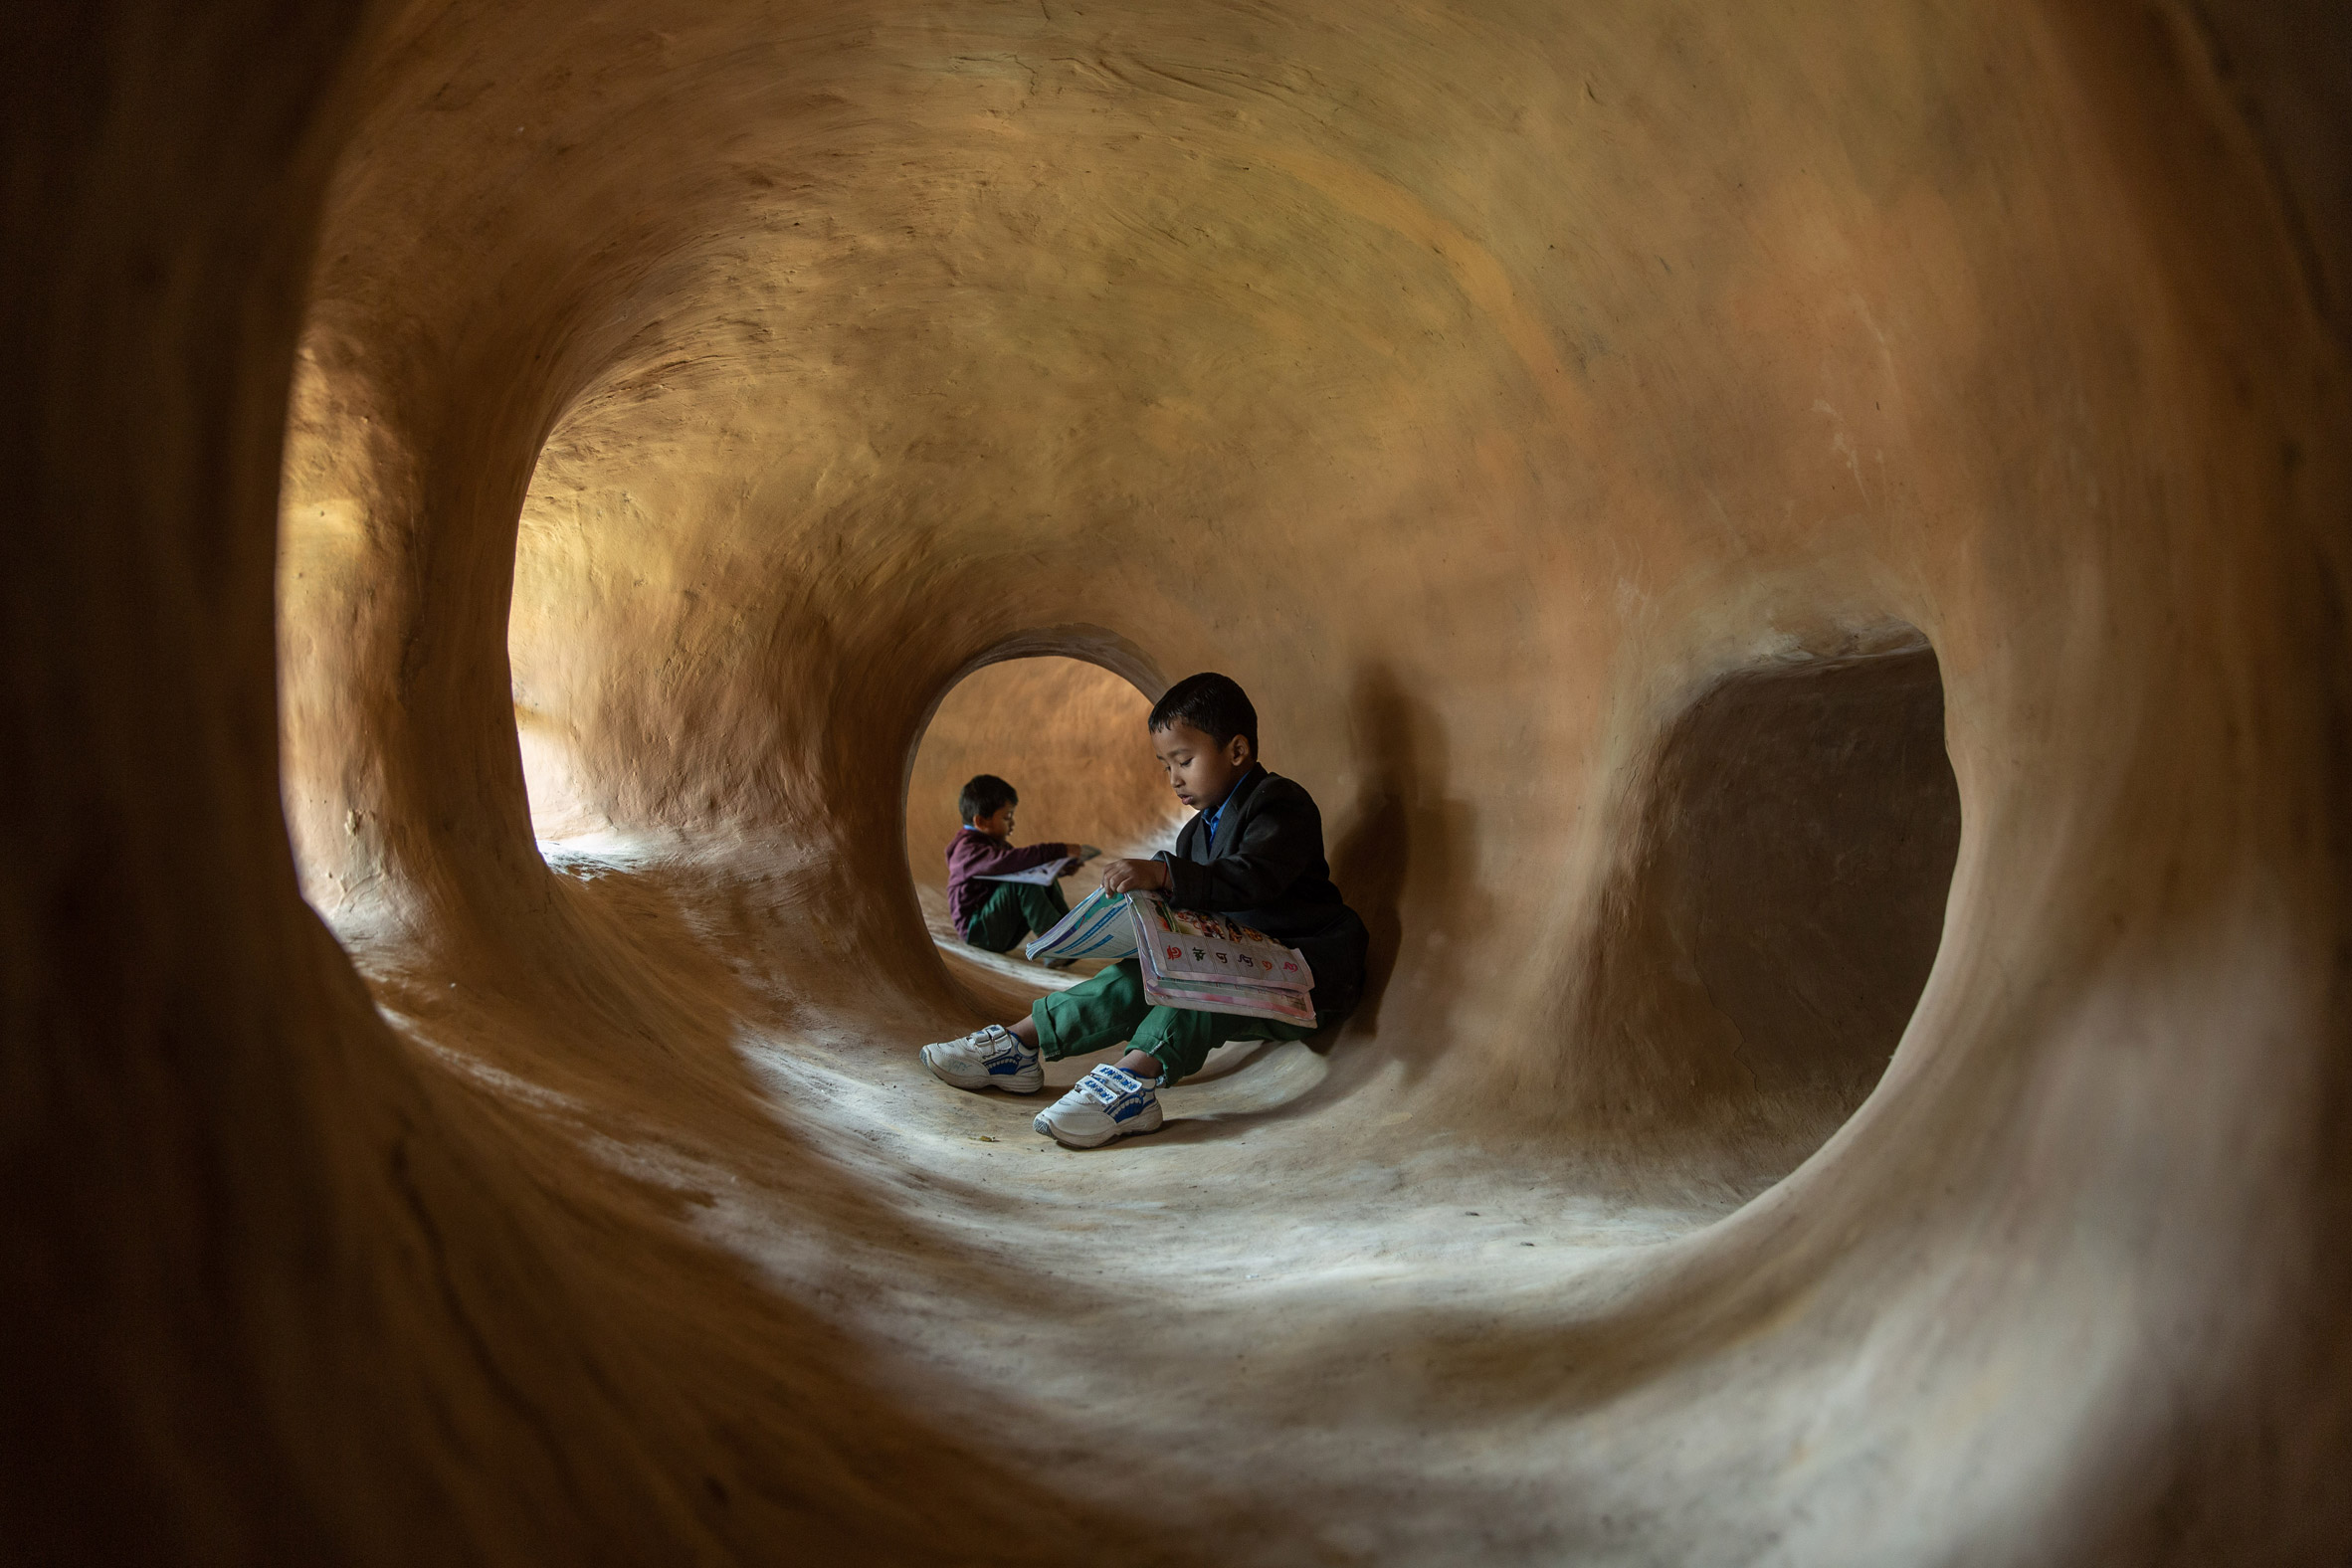 Each classroom has open access to a 'cave' system